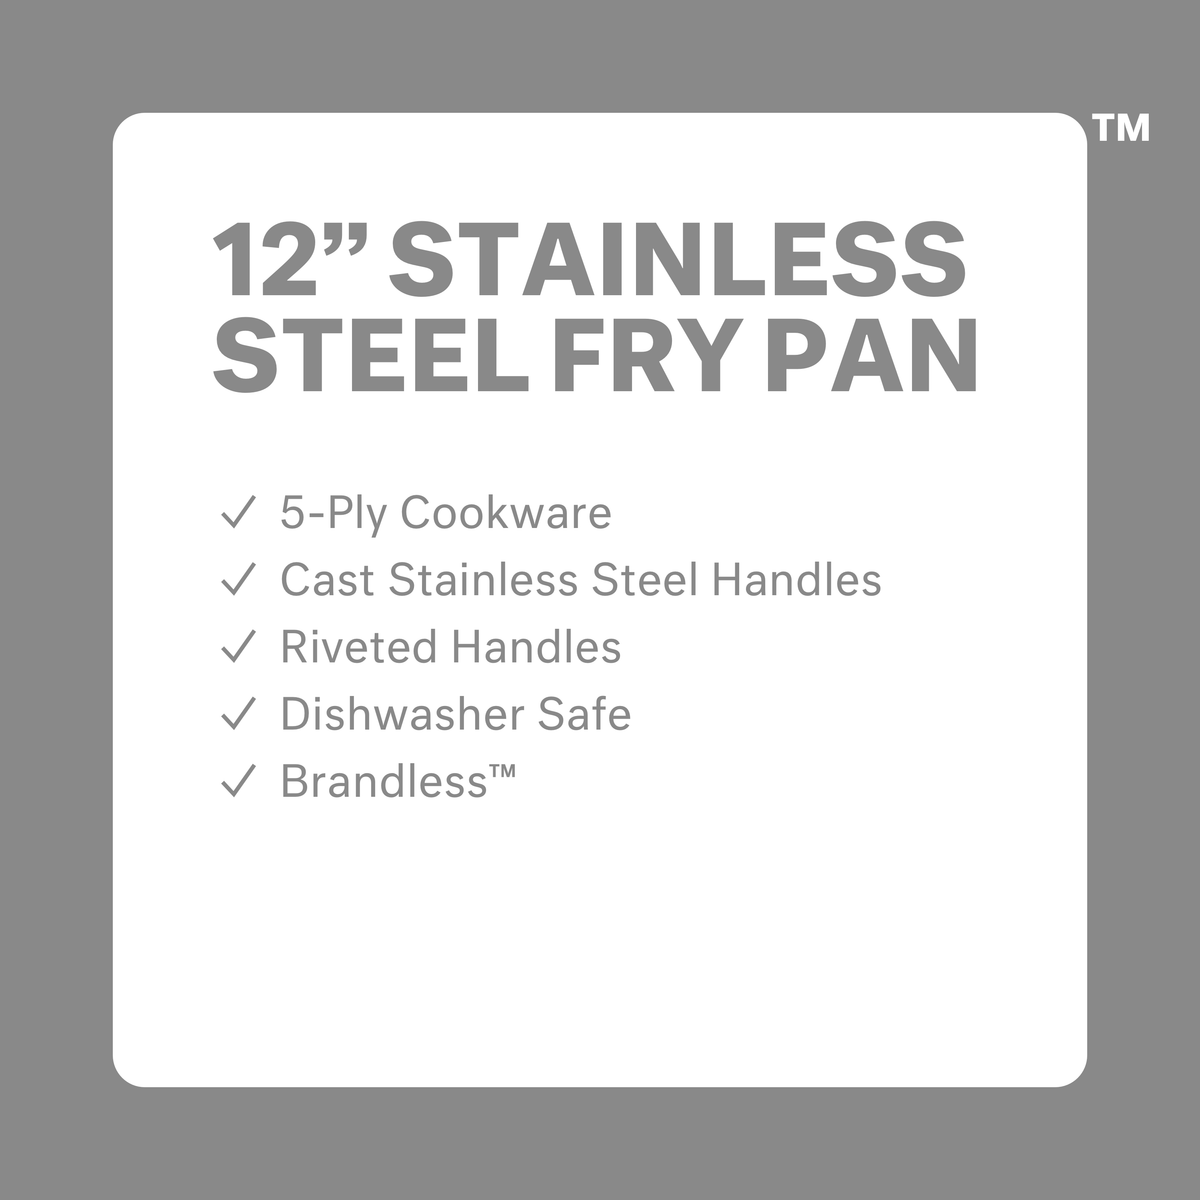 12 inch stainless steel fry pan. 5-ply cookware. Cast stainless steel handles. Riveted Handles. Dishwasher safe. Brandless.